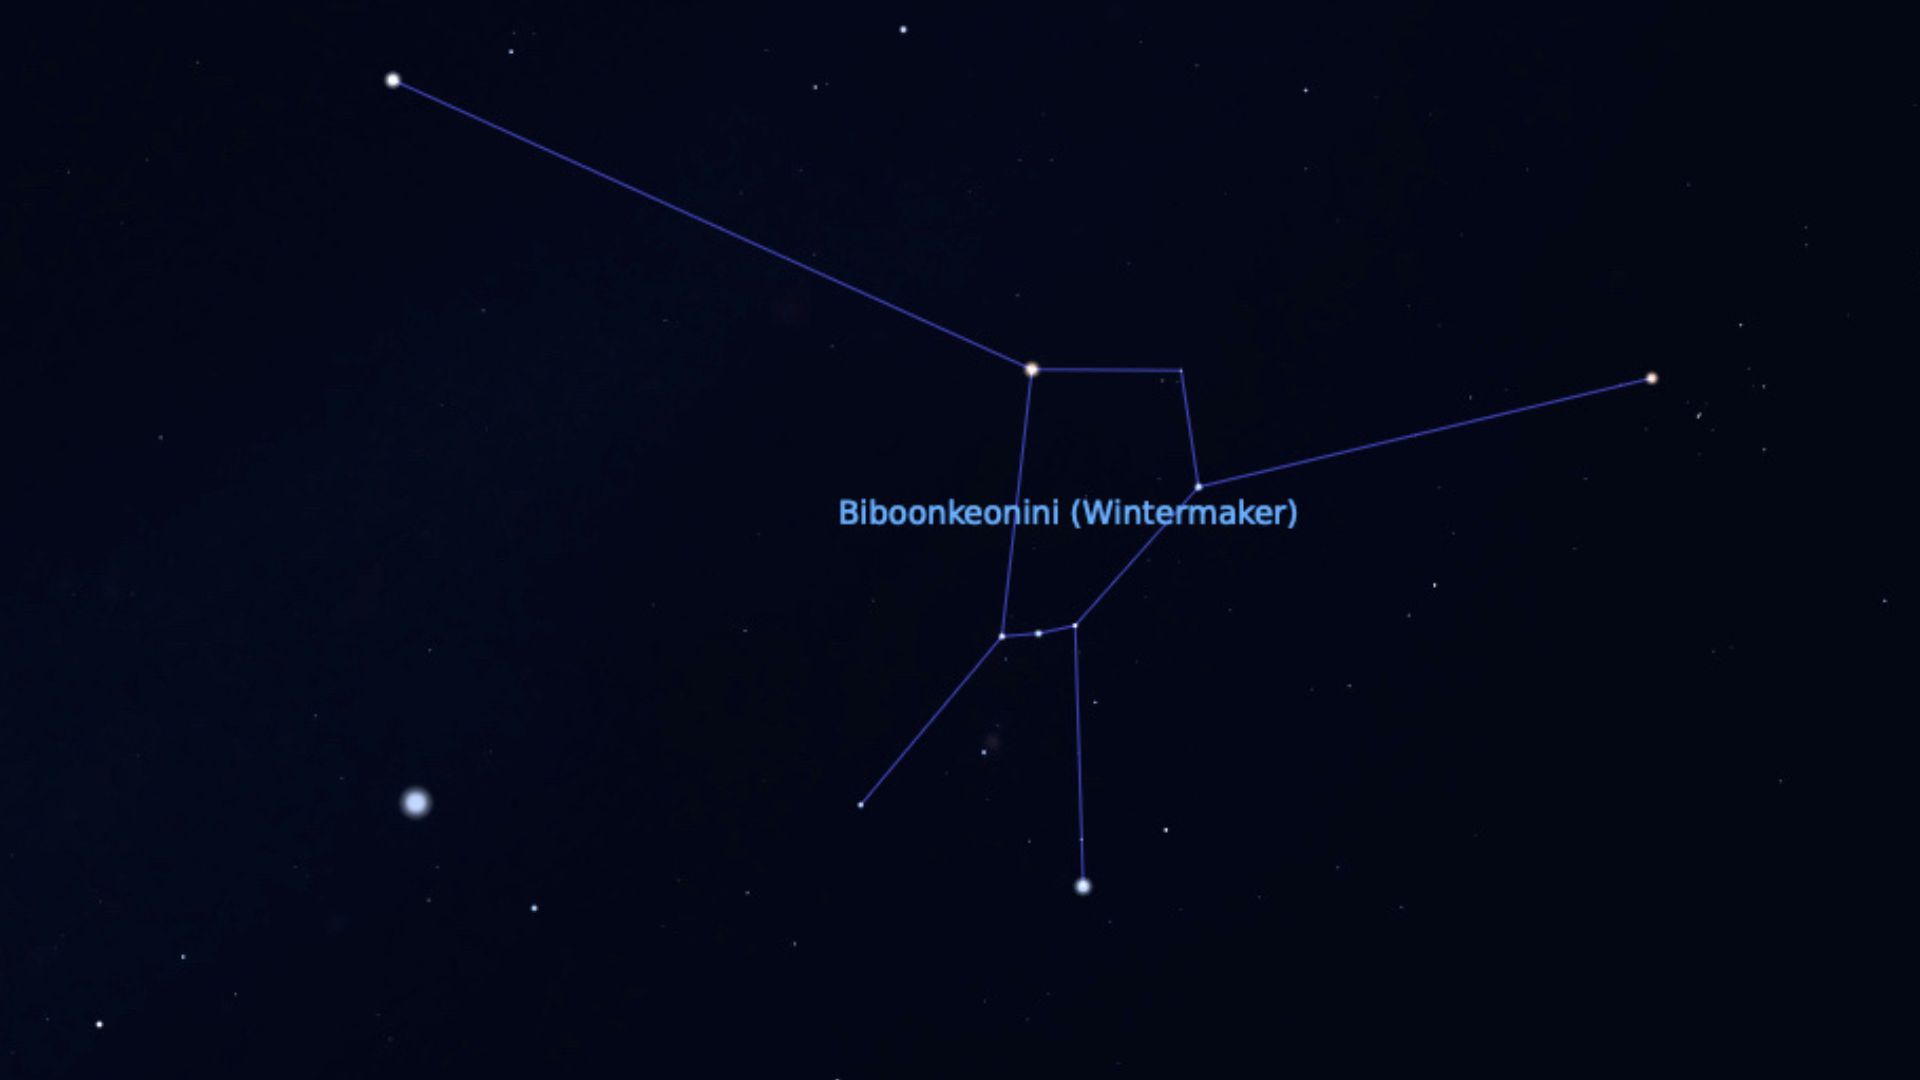 graphic illustration from Stellarium showing the location of the wintermaker in the night sky.